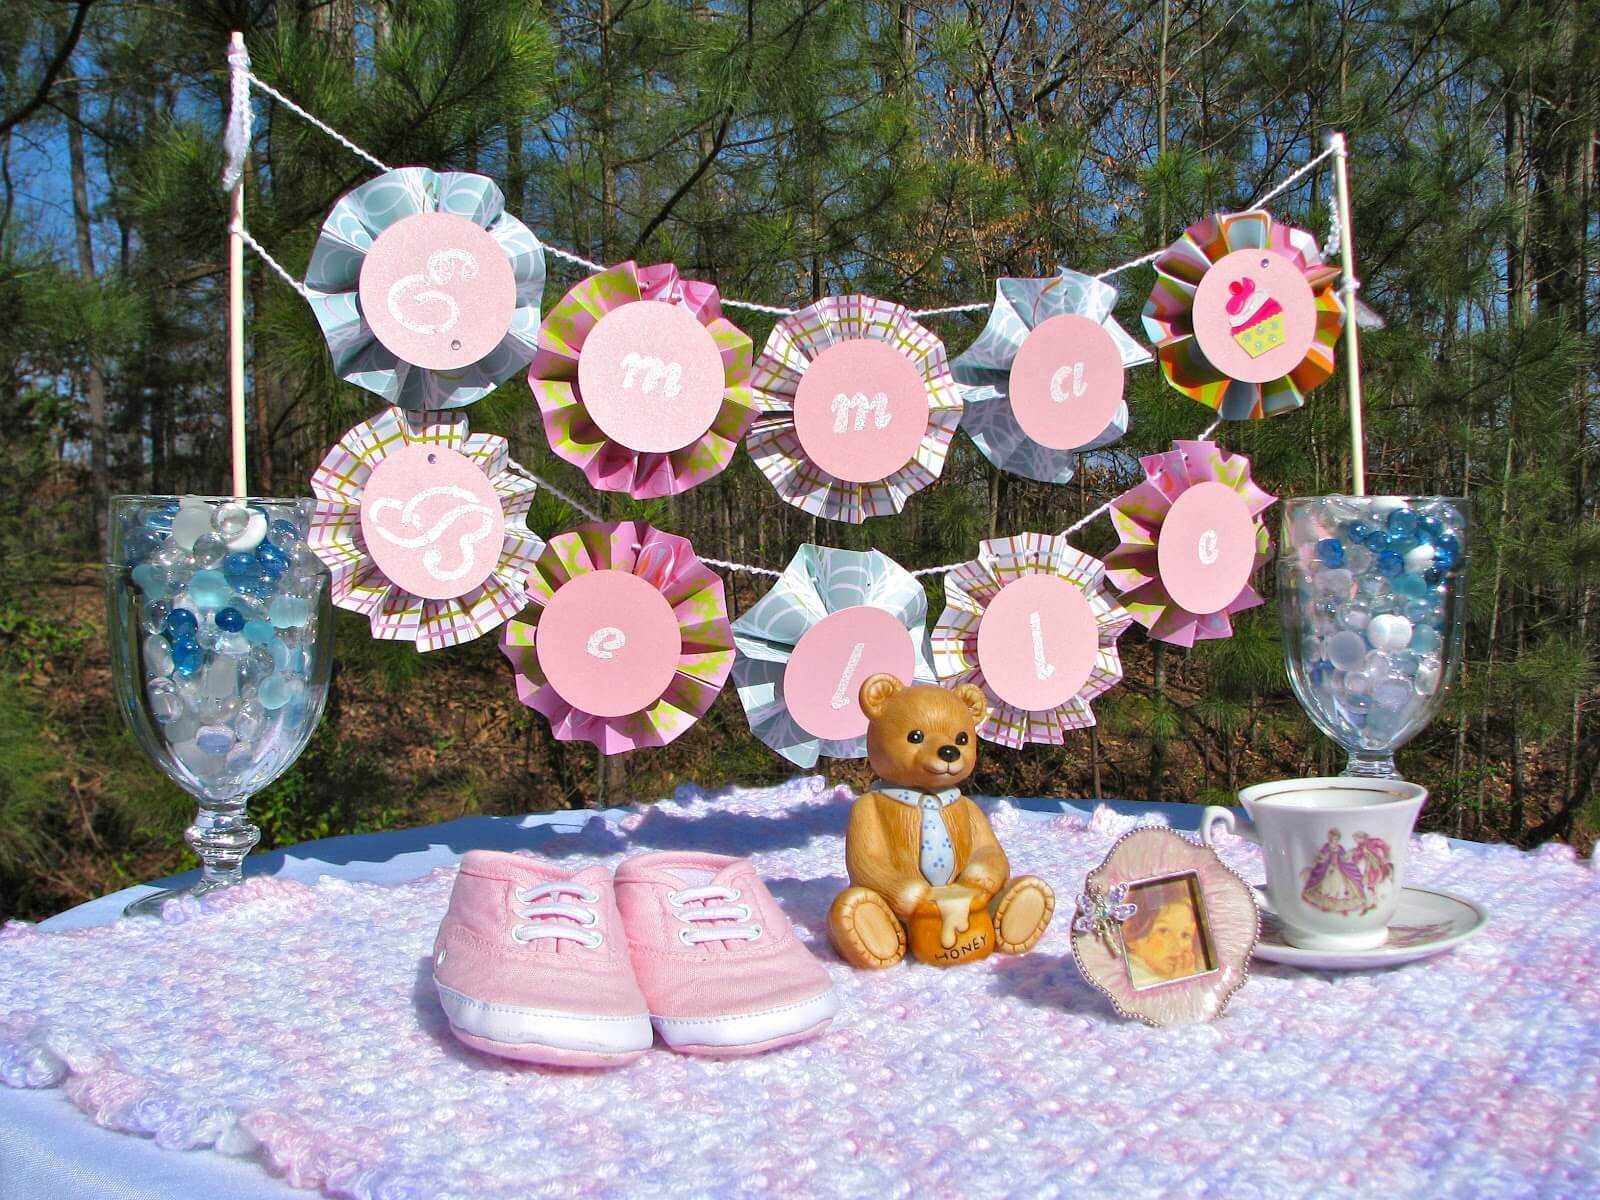 Lots Of Baby Shower Banner Ideas (+ Decorations) Regarding Diy Baby Shower Banner Template